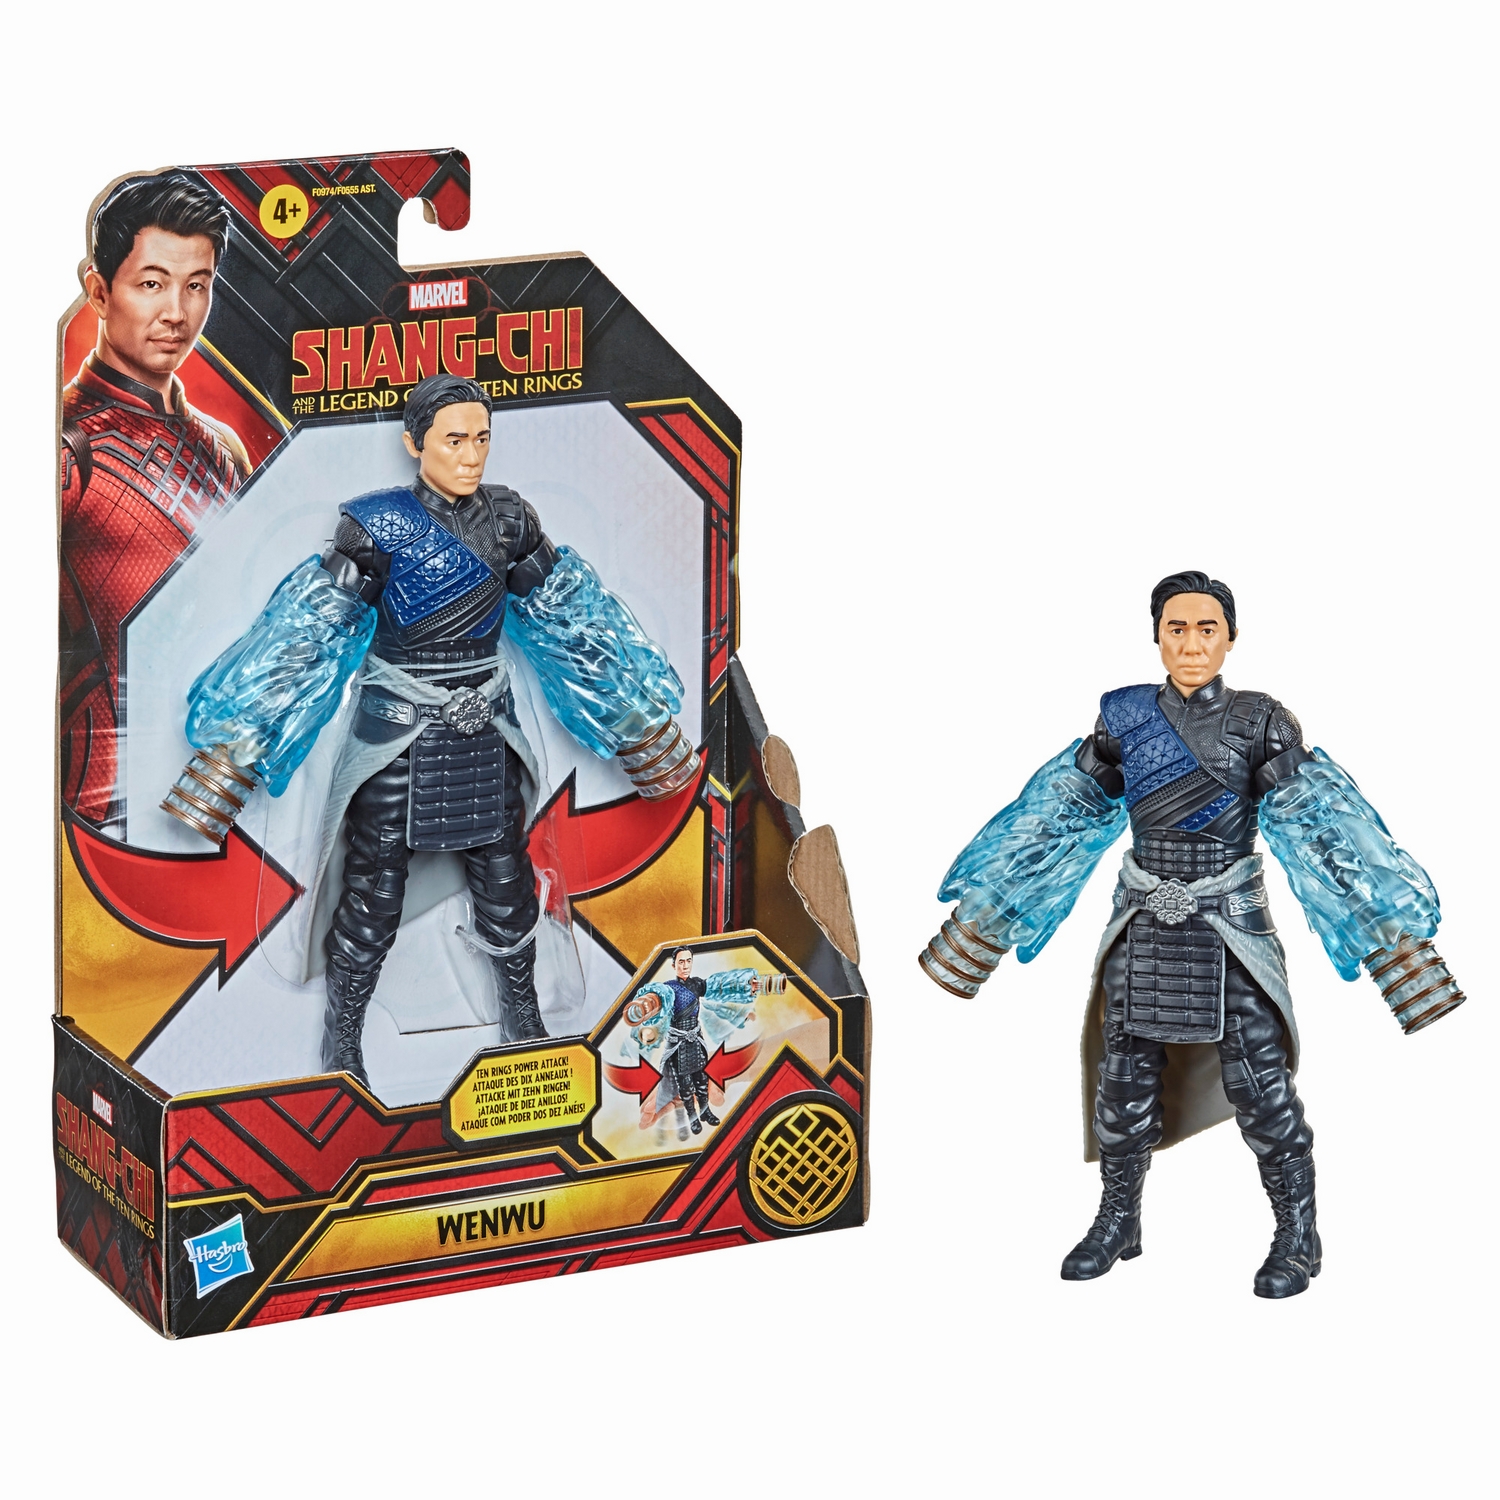 MARVEL SHANG-CHI AND THE LEGEND OF THE TEN RINGS 6-INCH WENWU Figure - oop (2).jpg